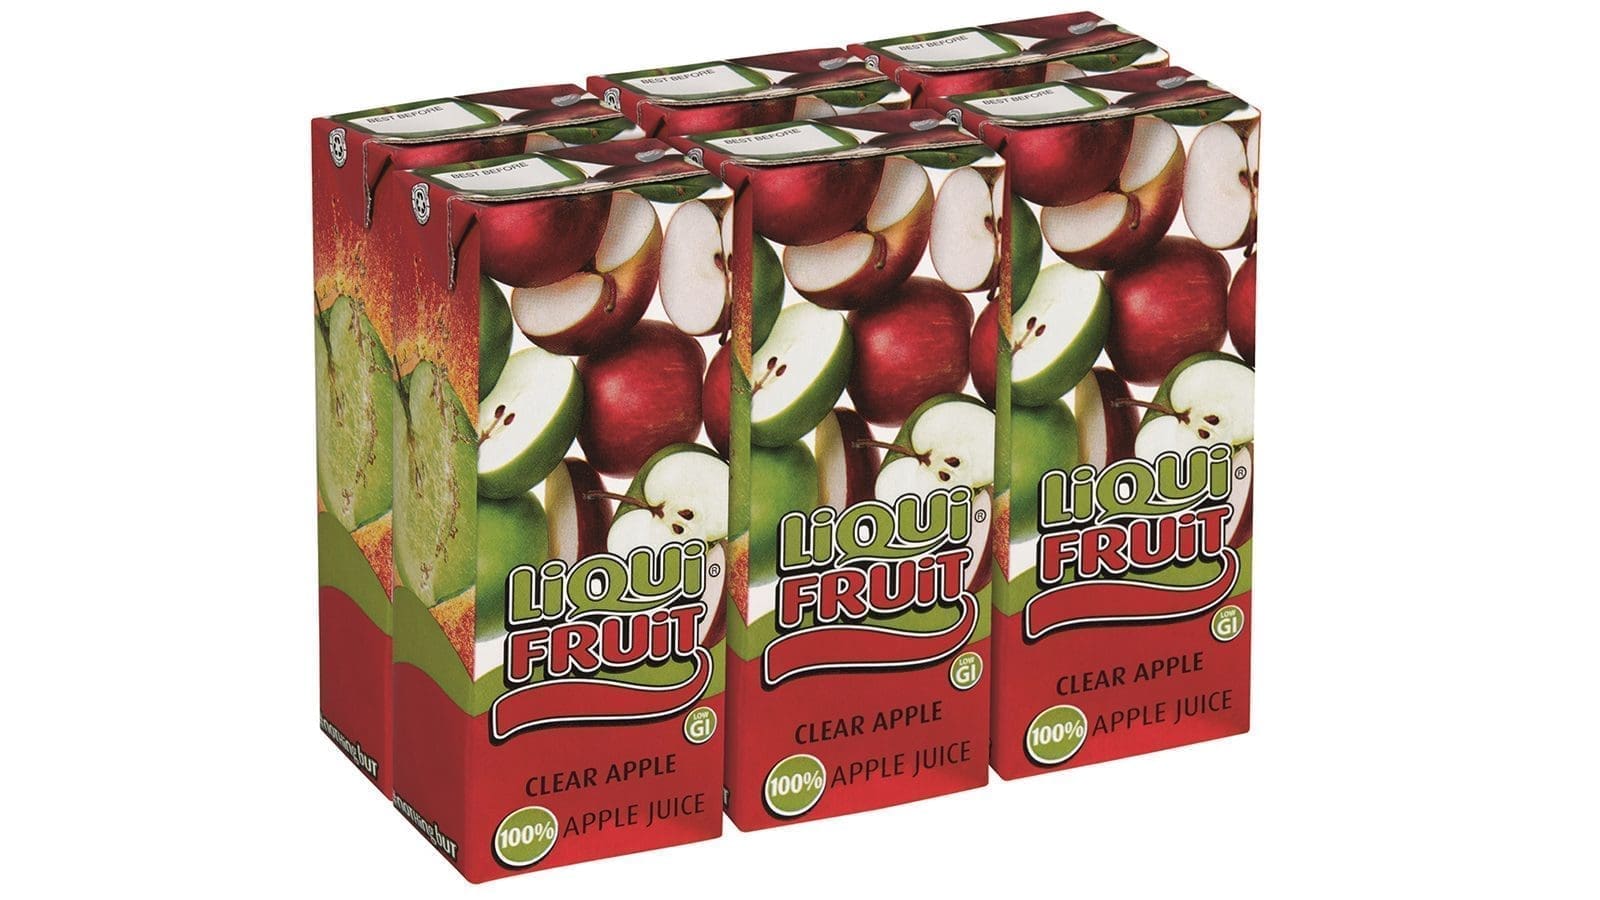 SA’s Pioneer Foods recalls LiquiFruit, Ceres apple juice brands due to mould contamination